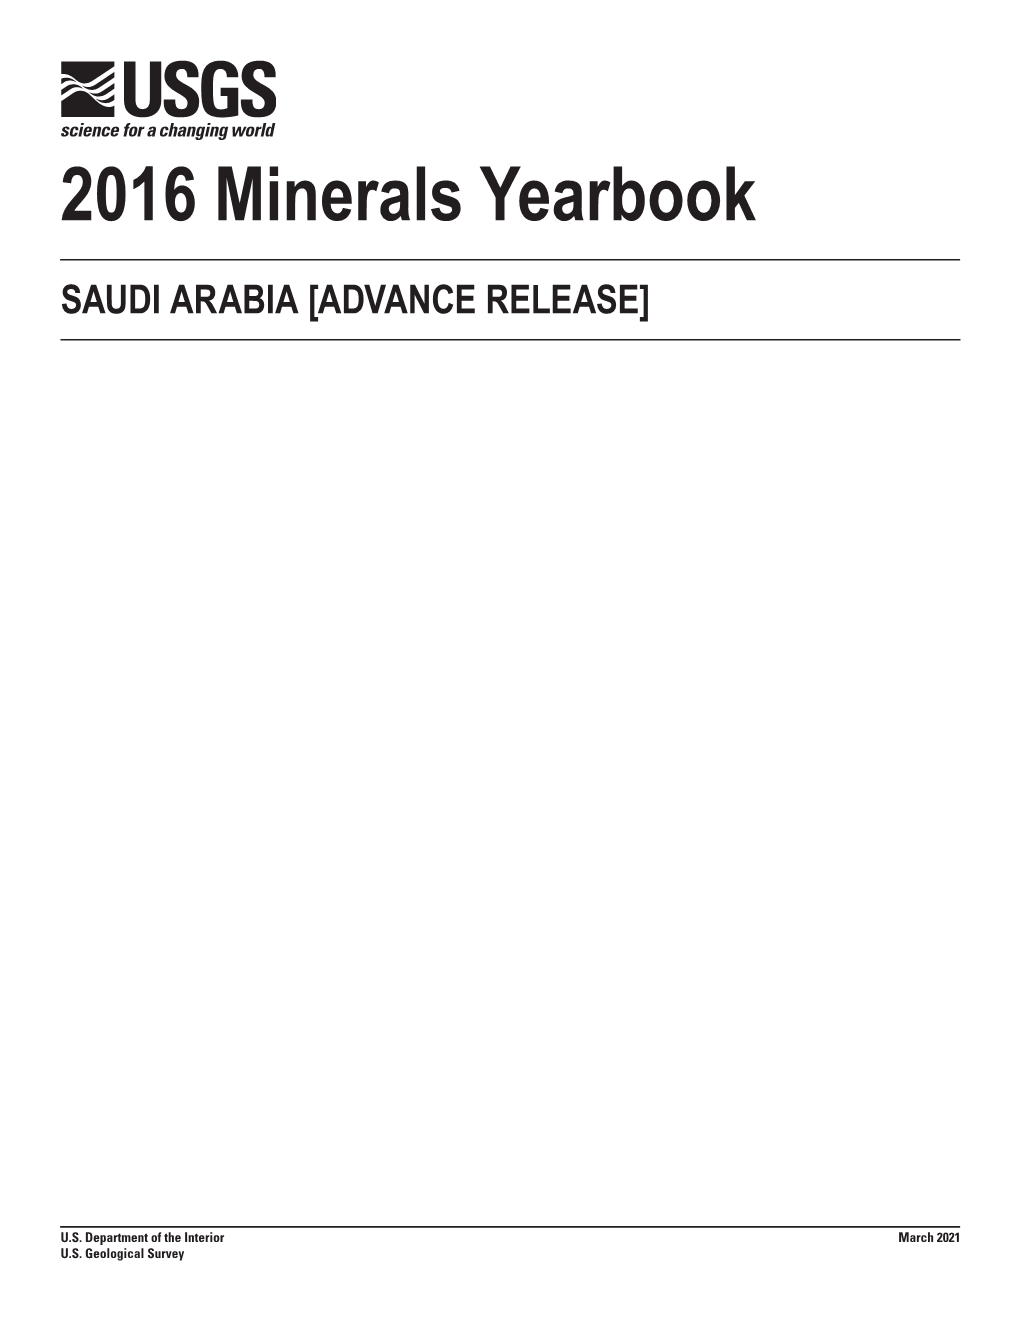 The Mineral Industry of Saudi Arabia in 2016